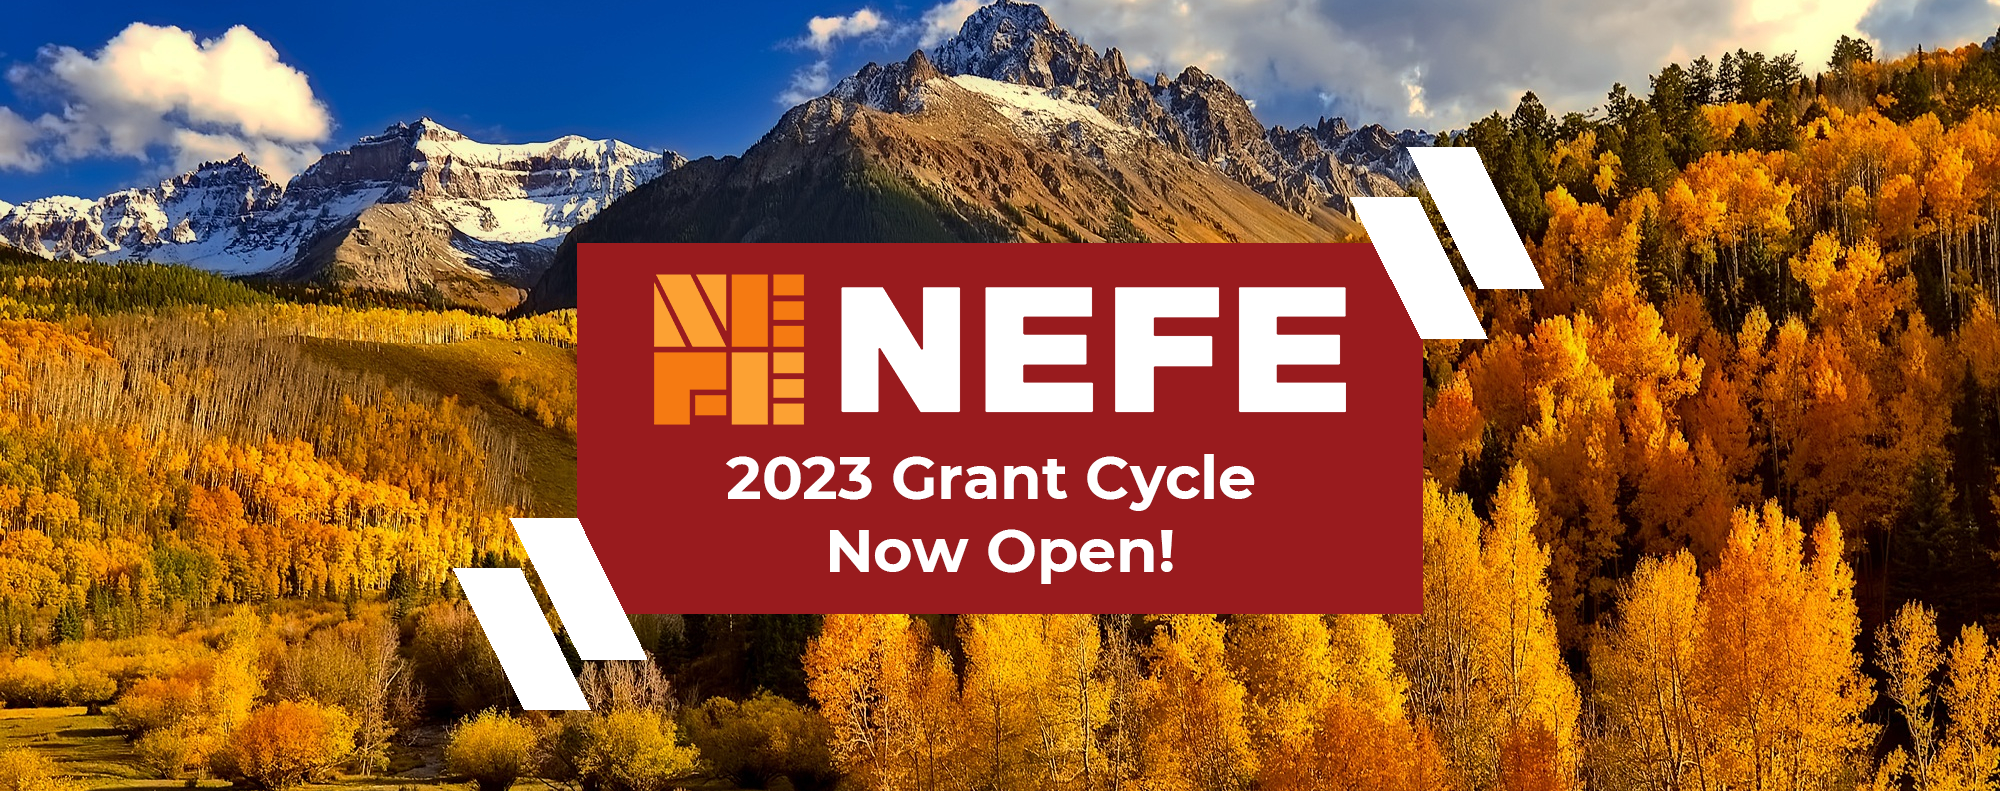 A mountain range with trees and a red sign “NEFE 2023 Grant Cycle Now Open